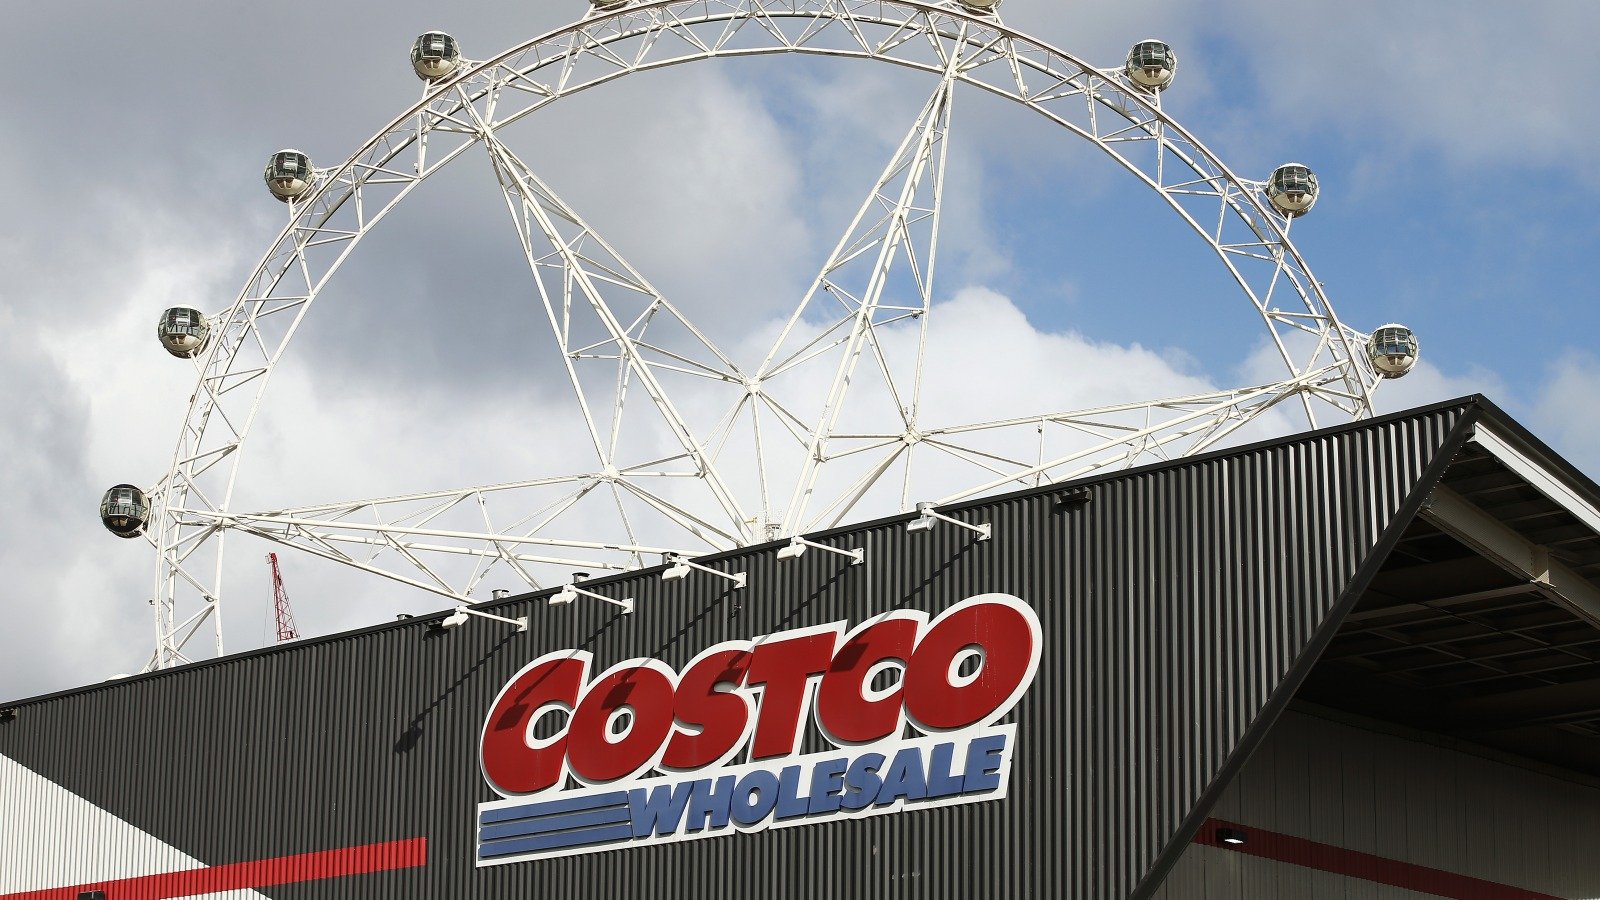 Employees Reveal What You Should Never Do At Costco